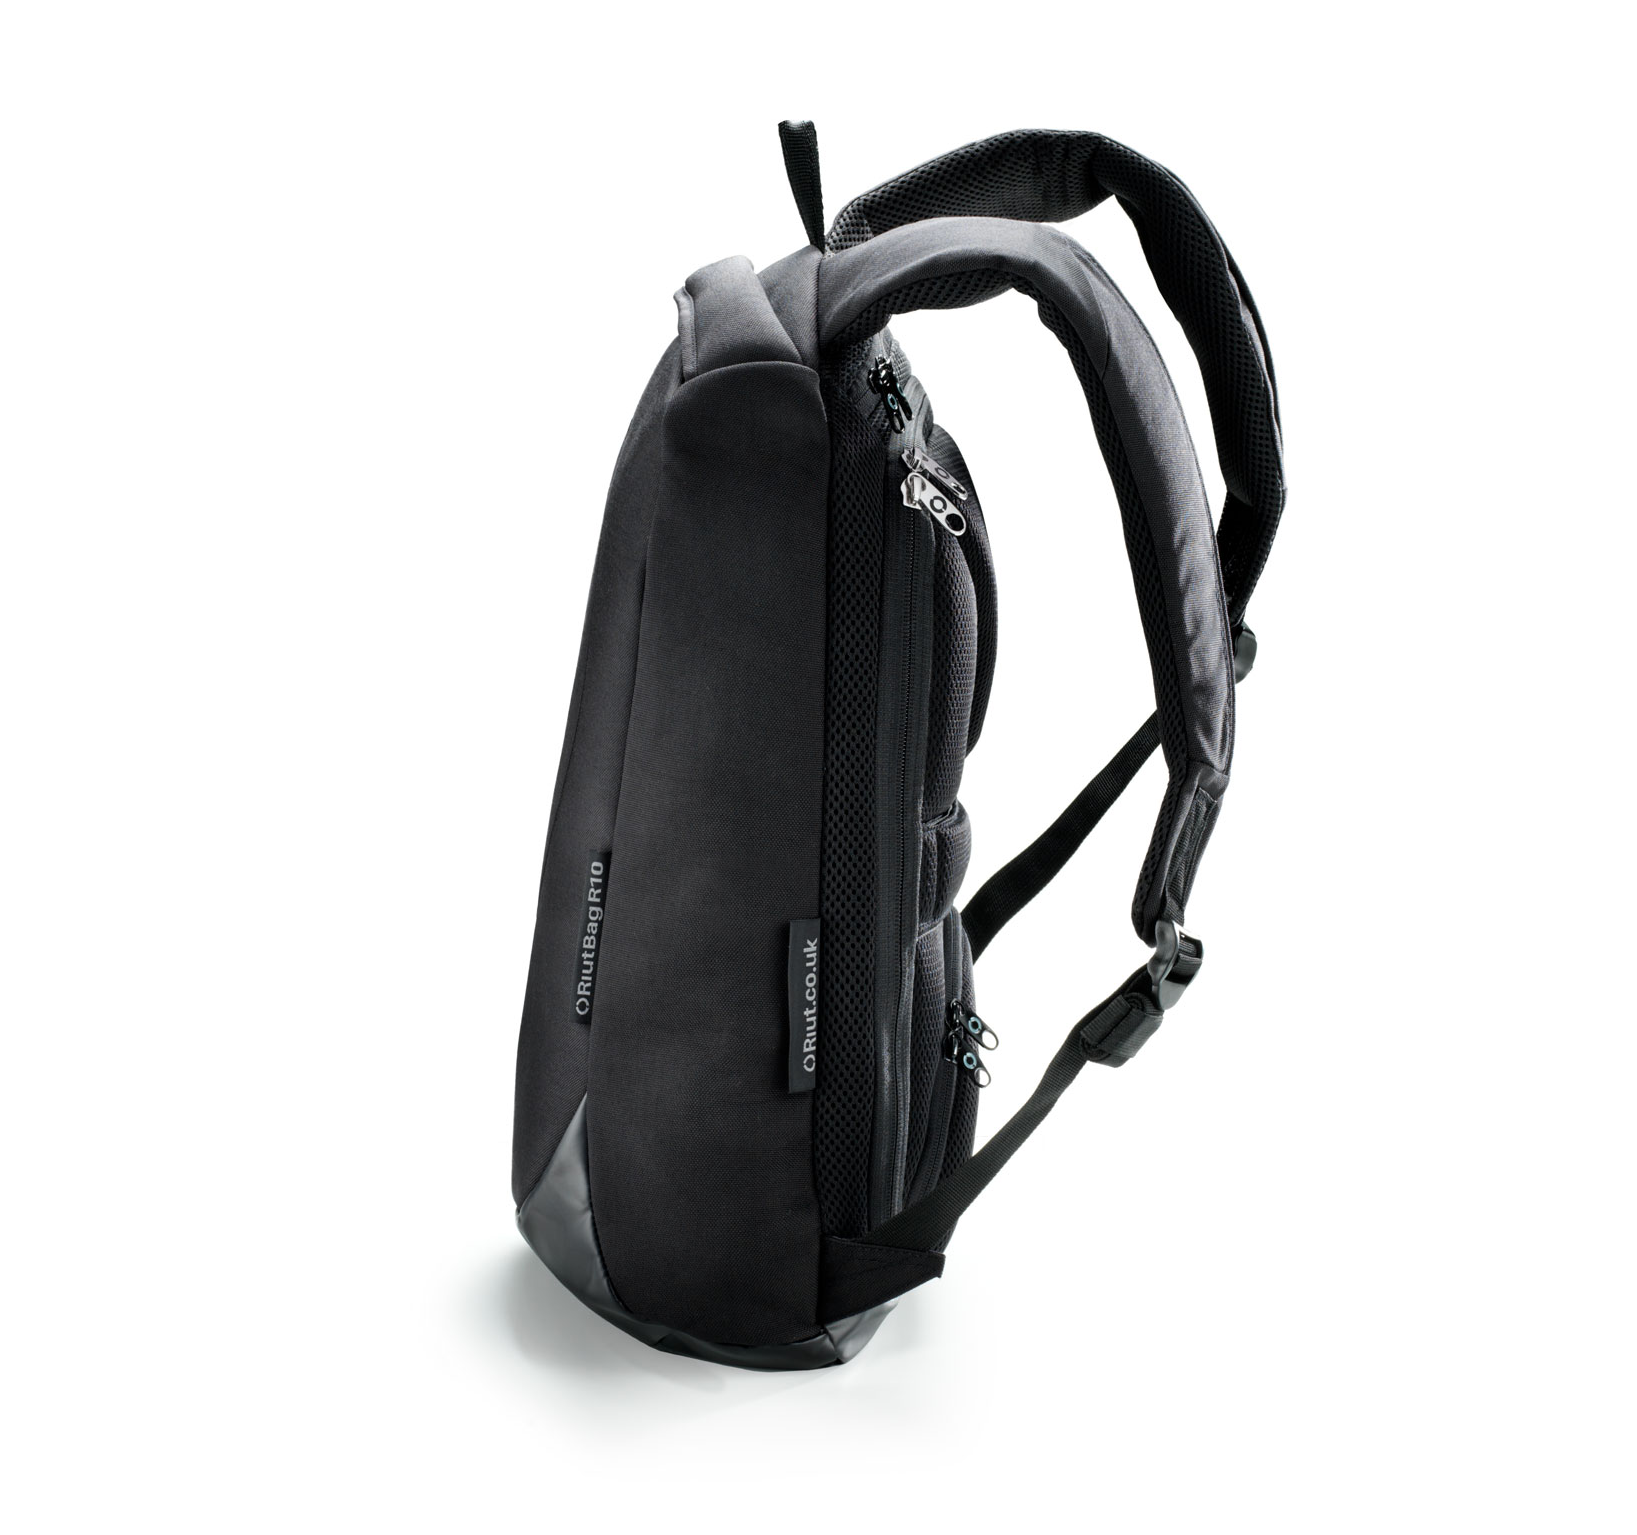 RiutBag R10, 10 litre slim, black laptop backpack with all its zips hidden against your back. Only you can access your belongings. And now you can do it on the go. 